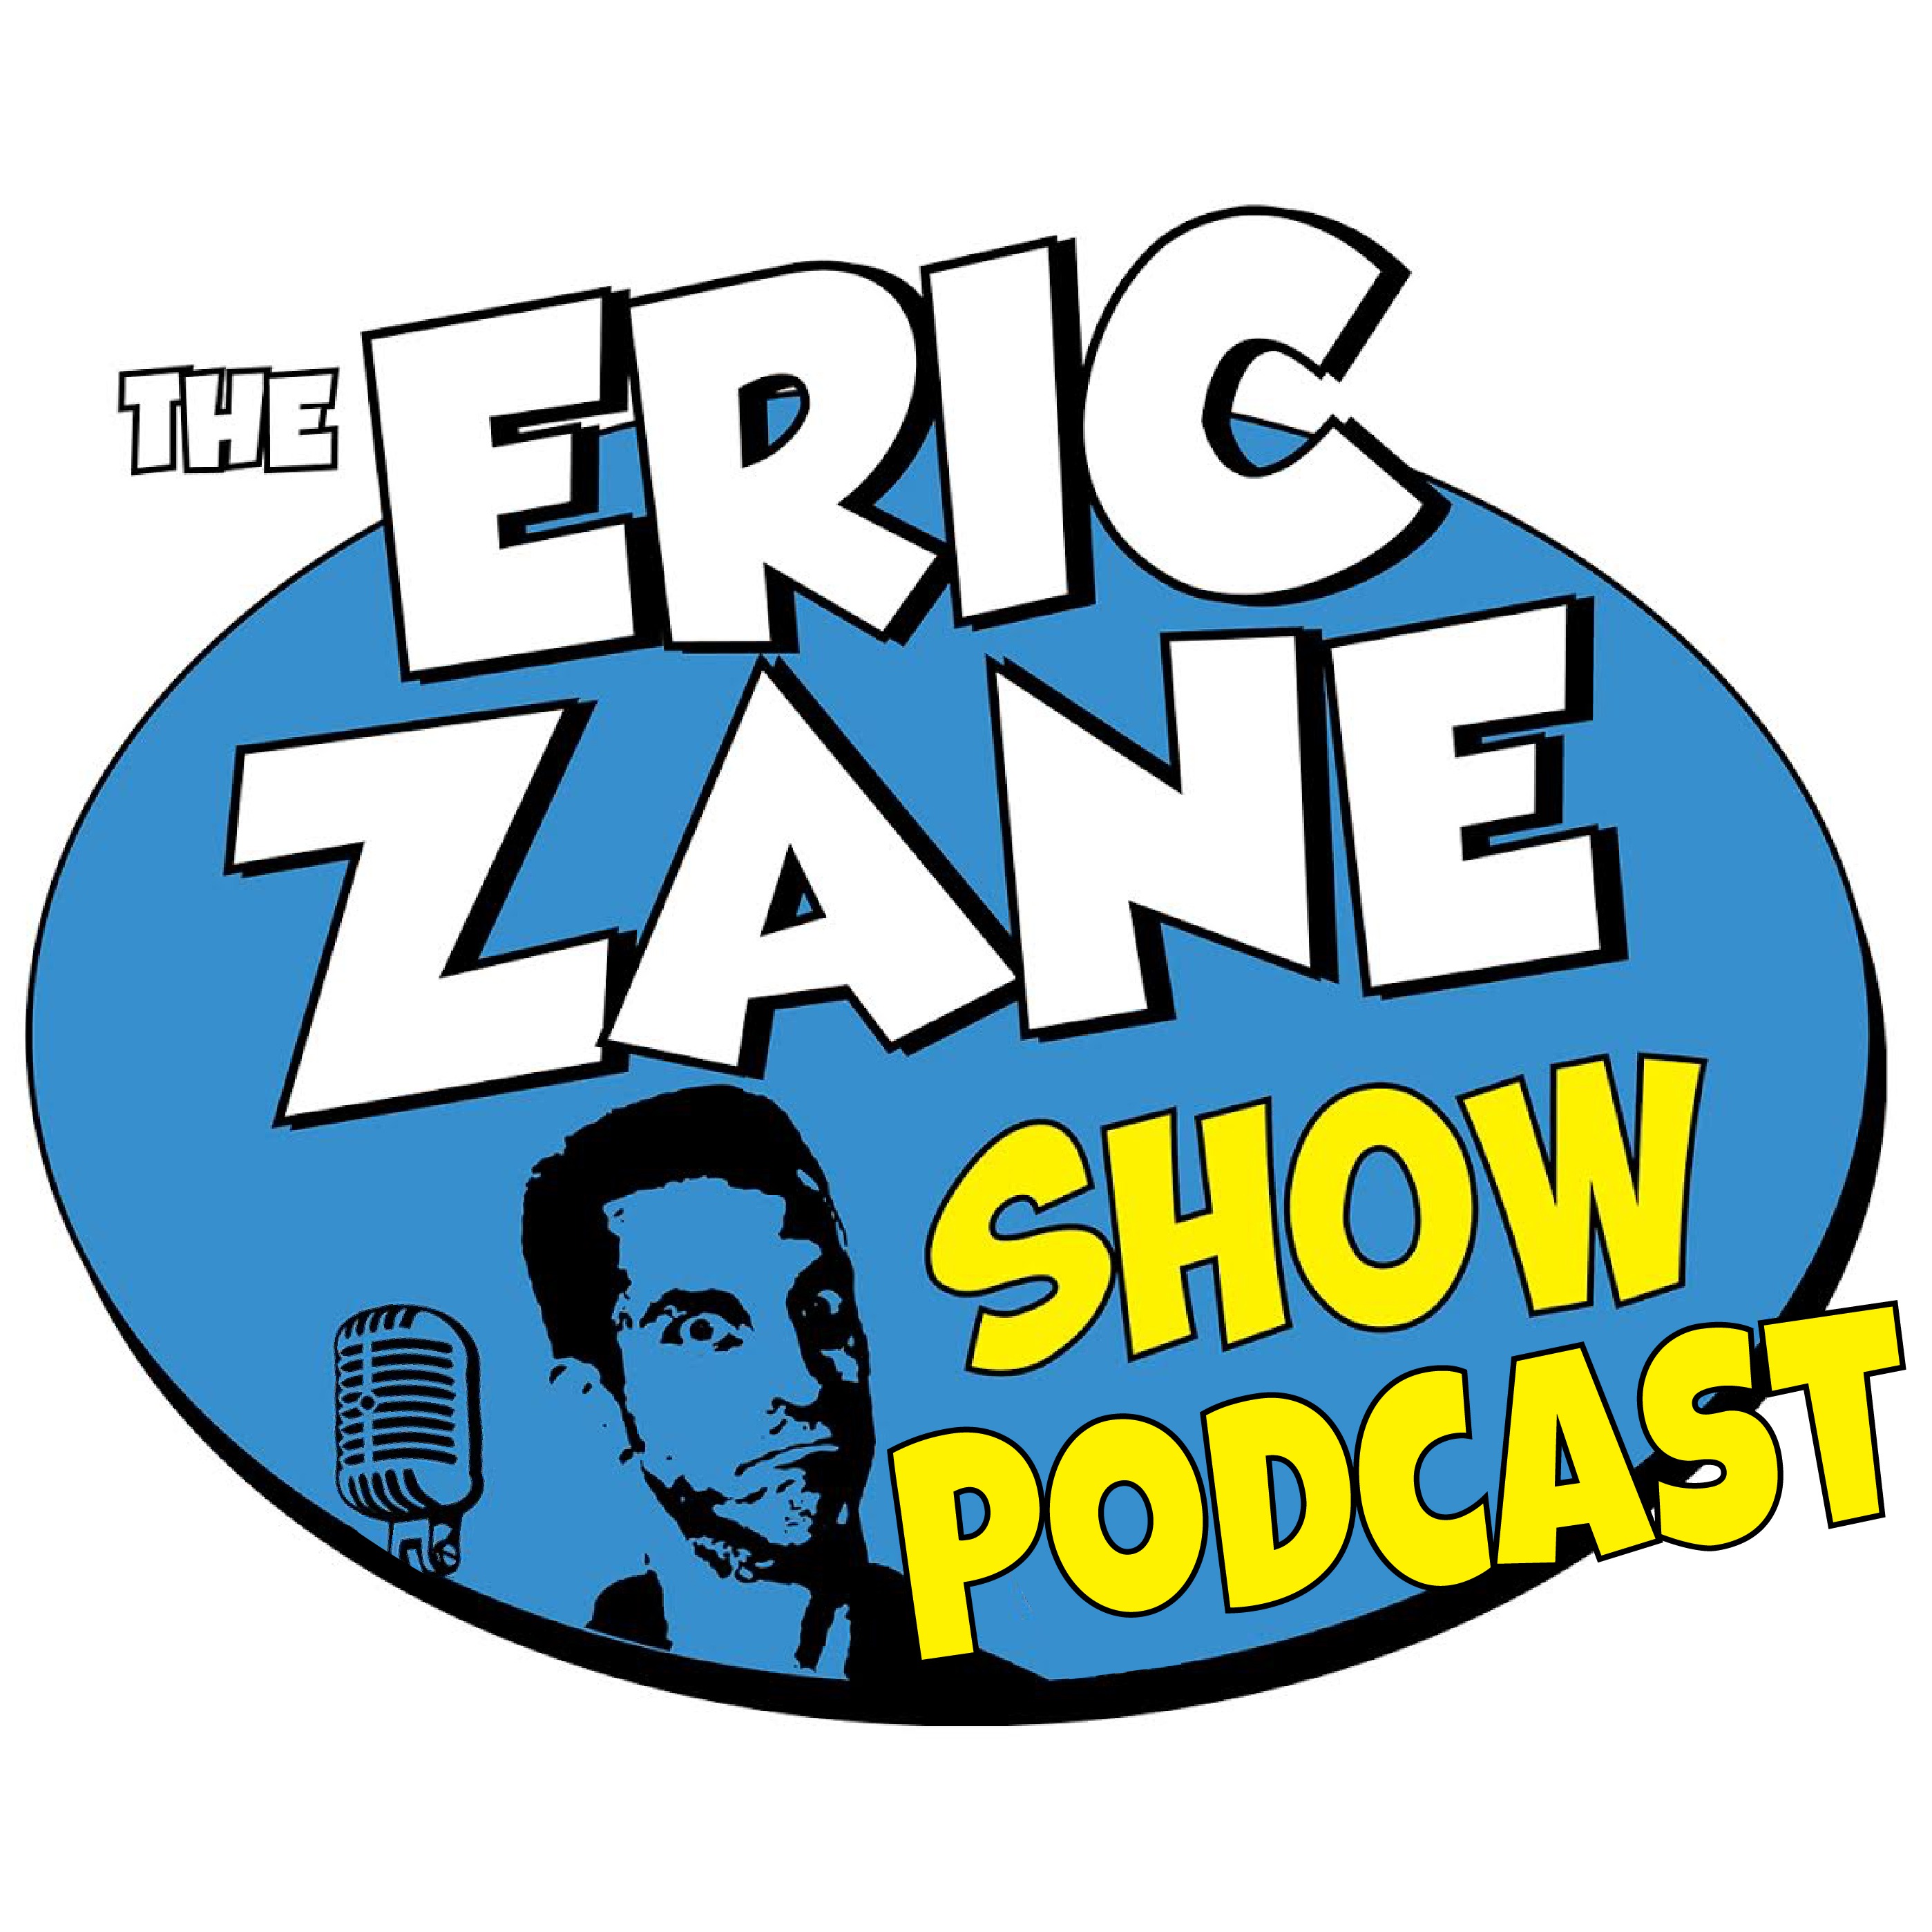 Eric Zane Show Podcast 872 Because I'm angry.